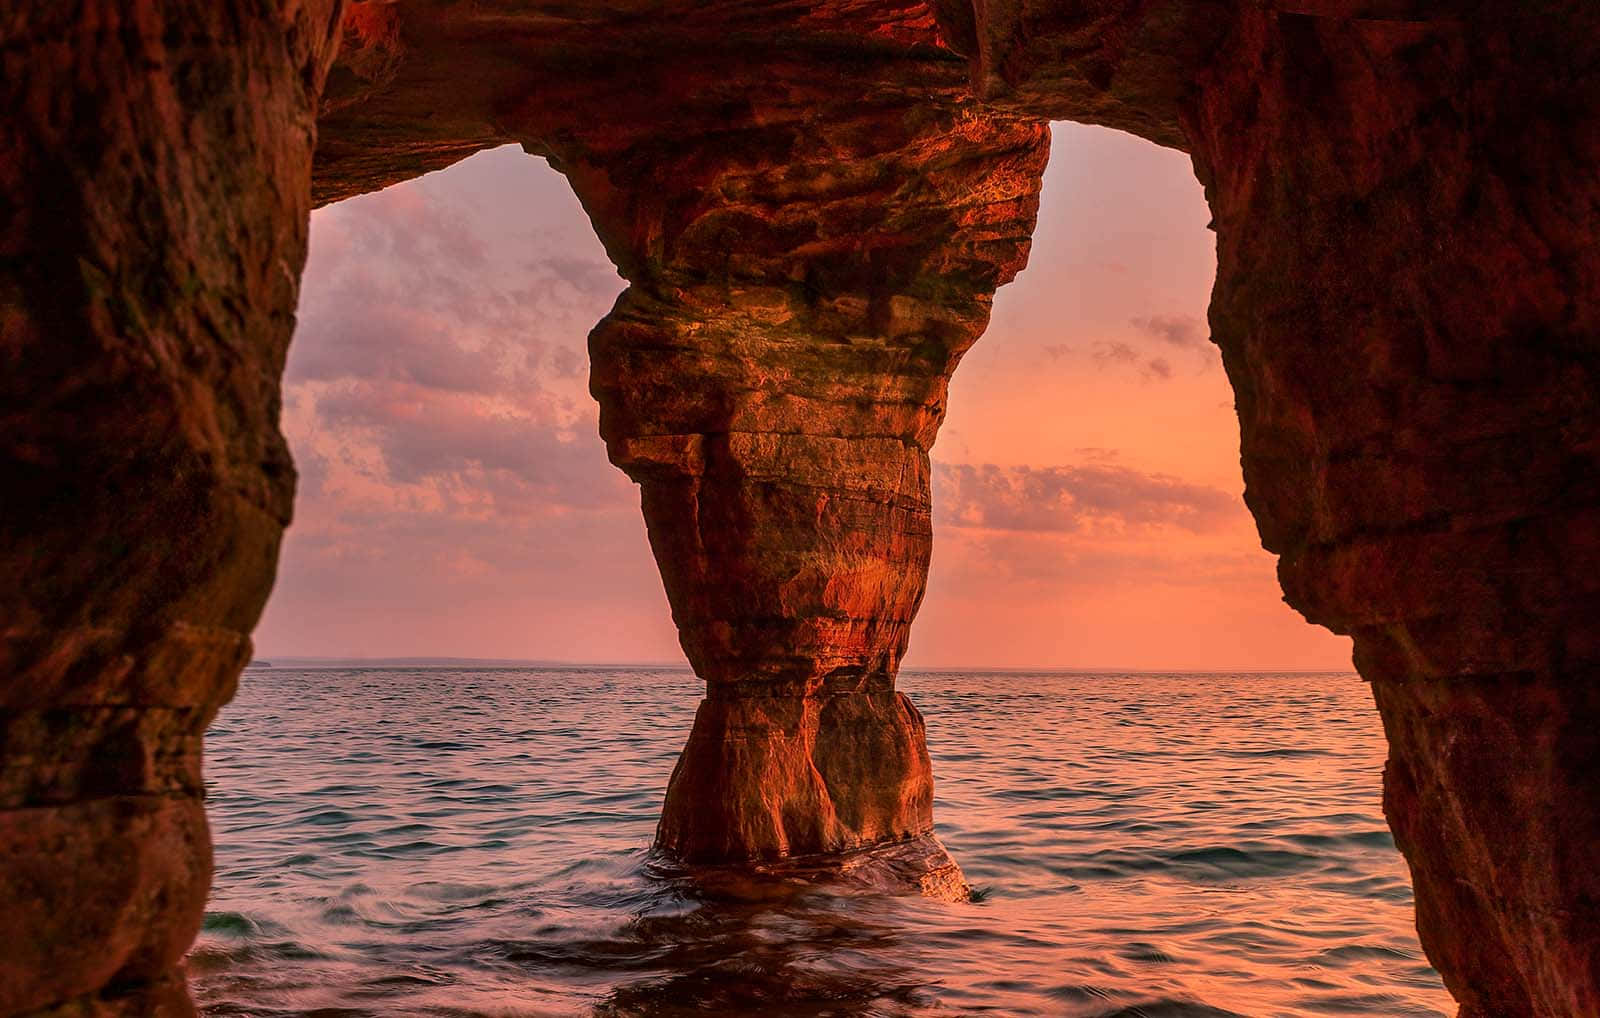 Sunset View Through Sea Cave Wallpaper